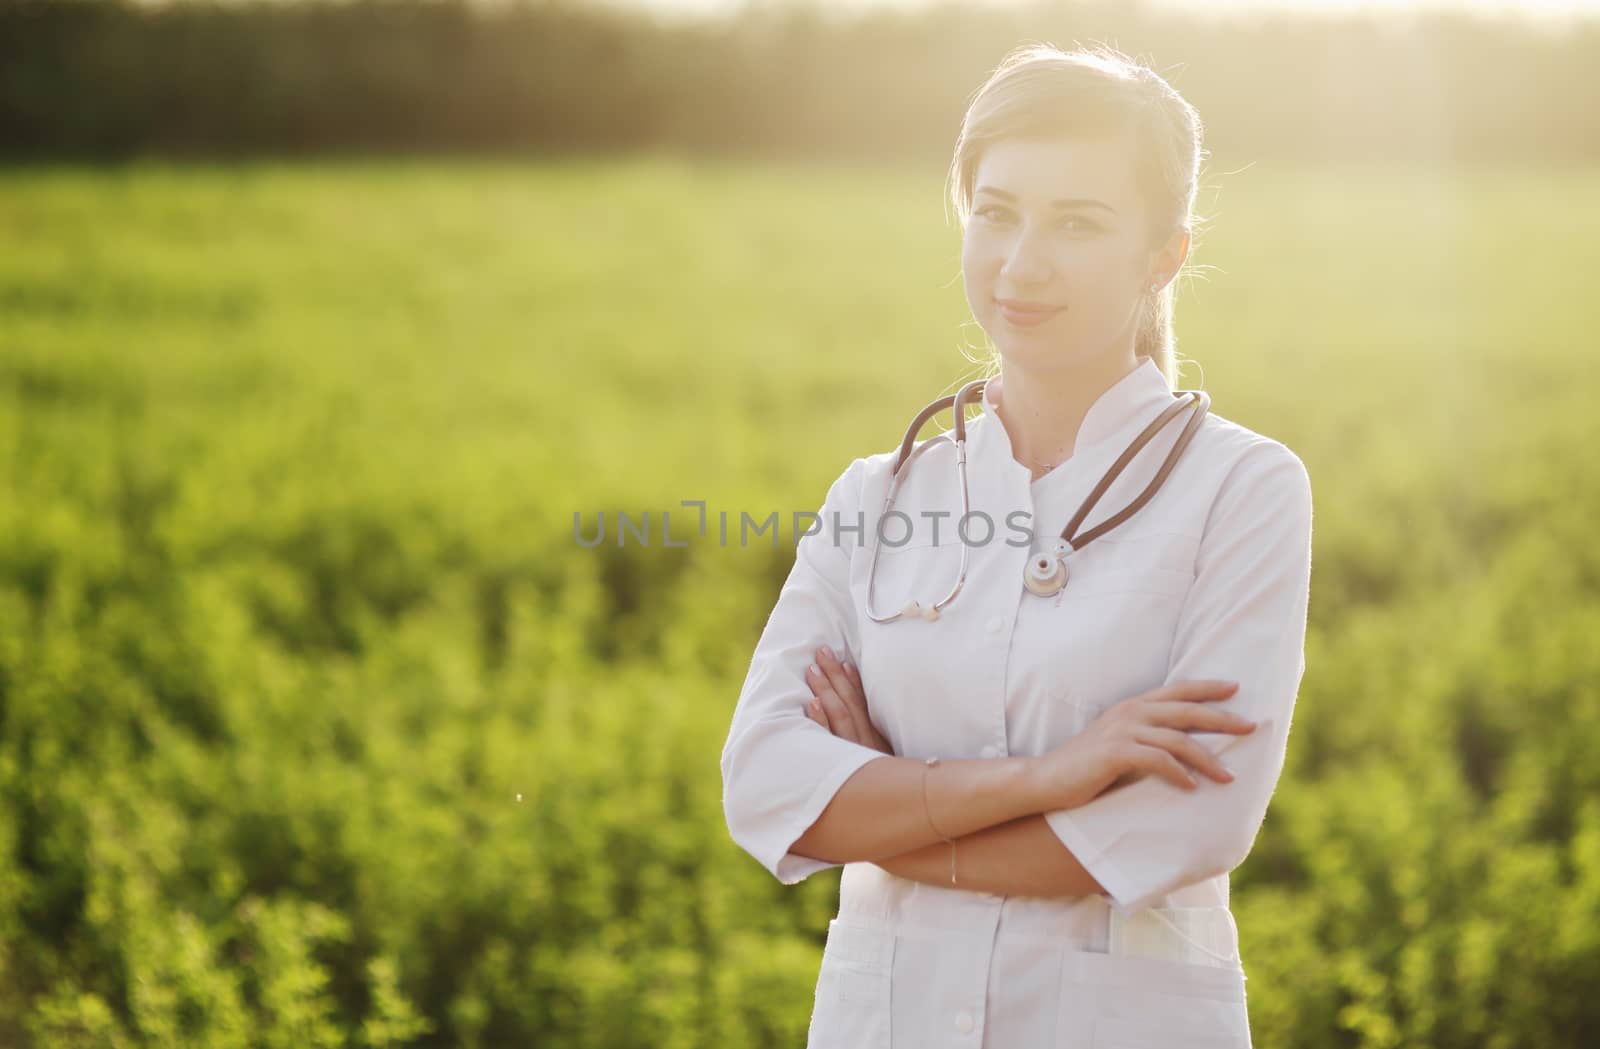 Portrait of a beautiful female doctor or nurse on green grass background. Prevention Covid-19 healthcare concept. Stethoscope over the neck. Woman, girl.